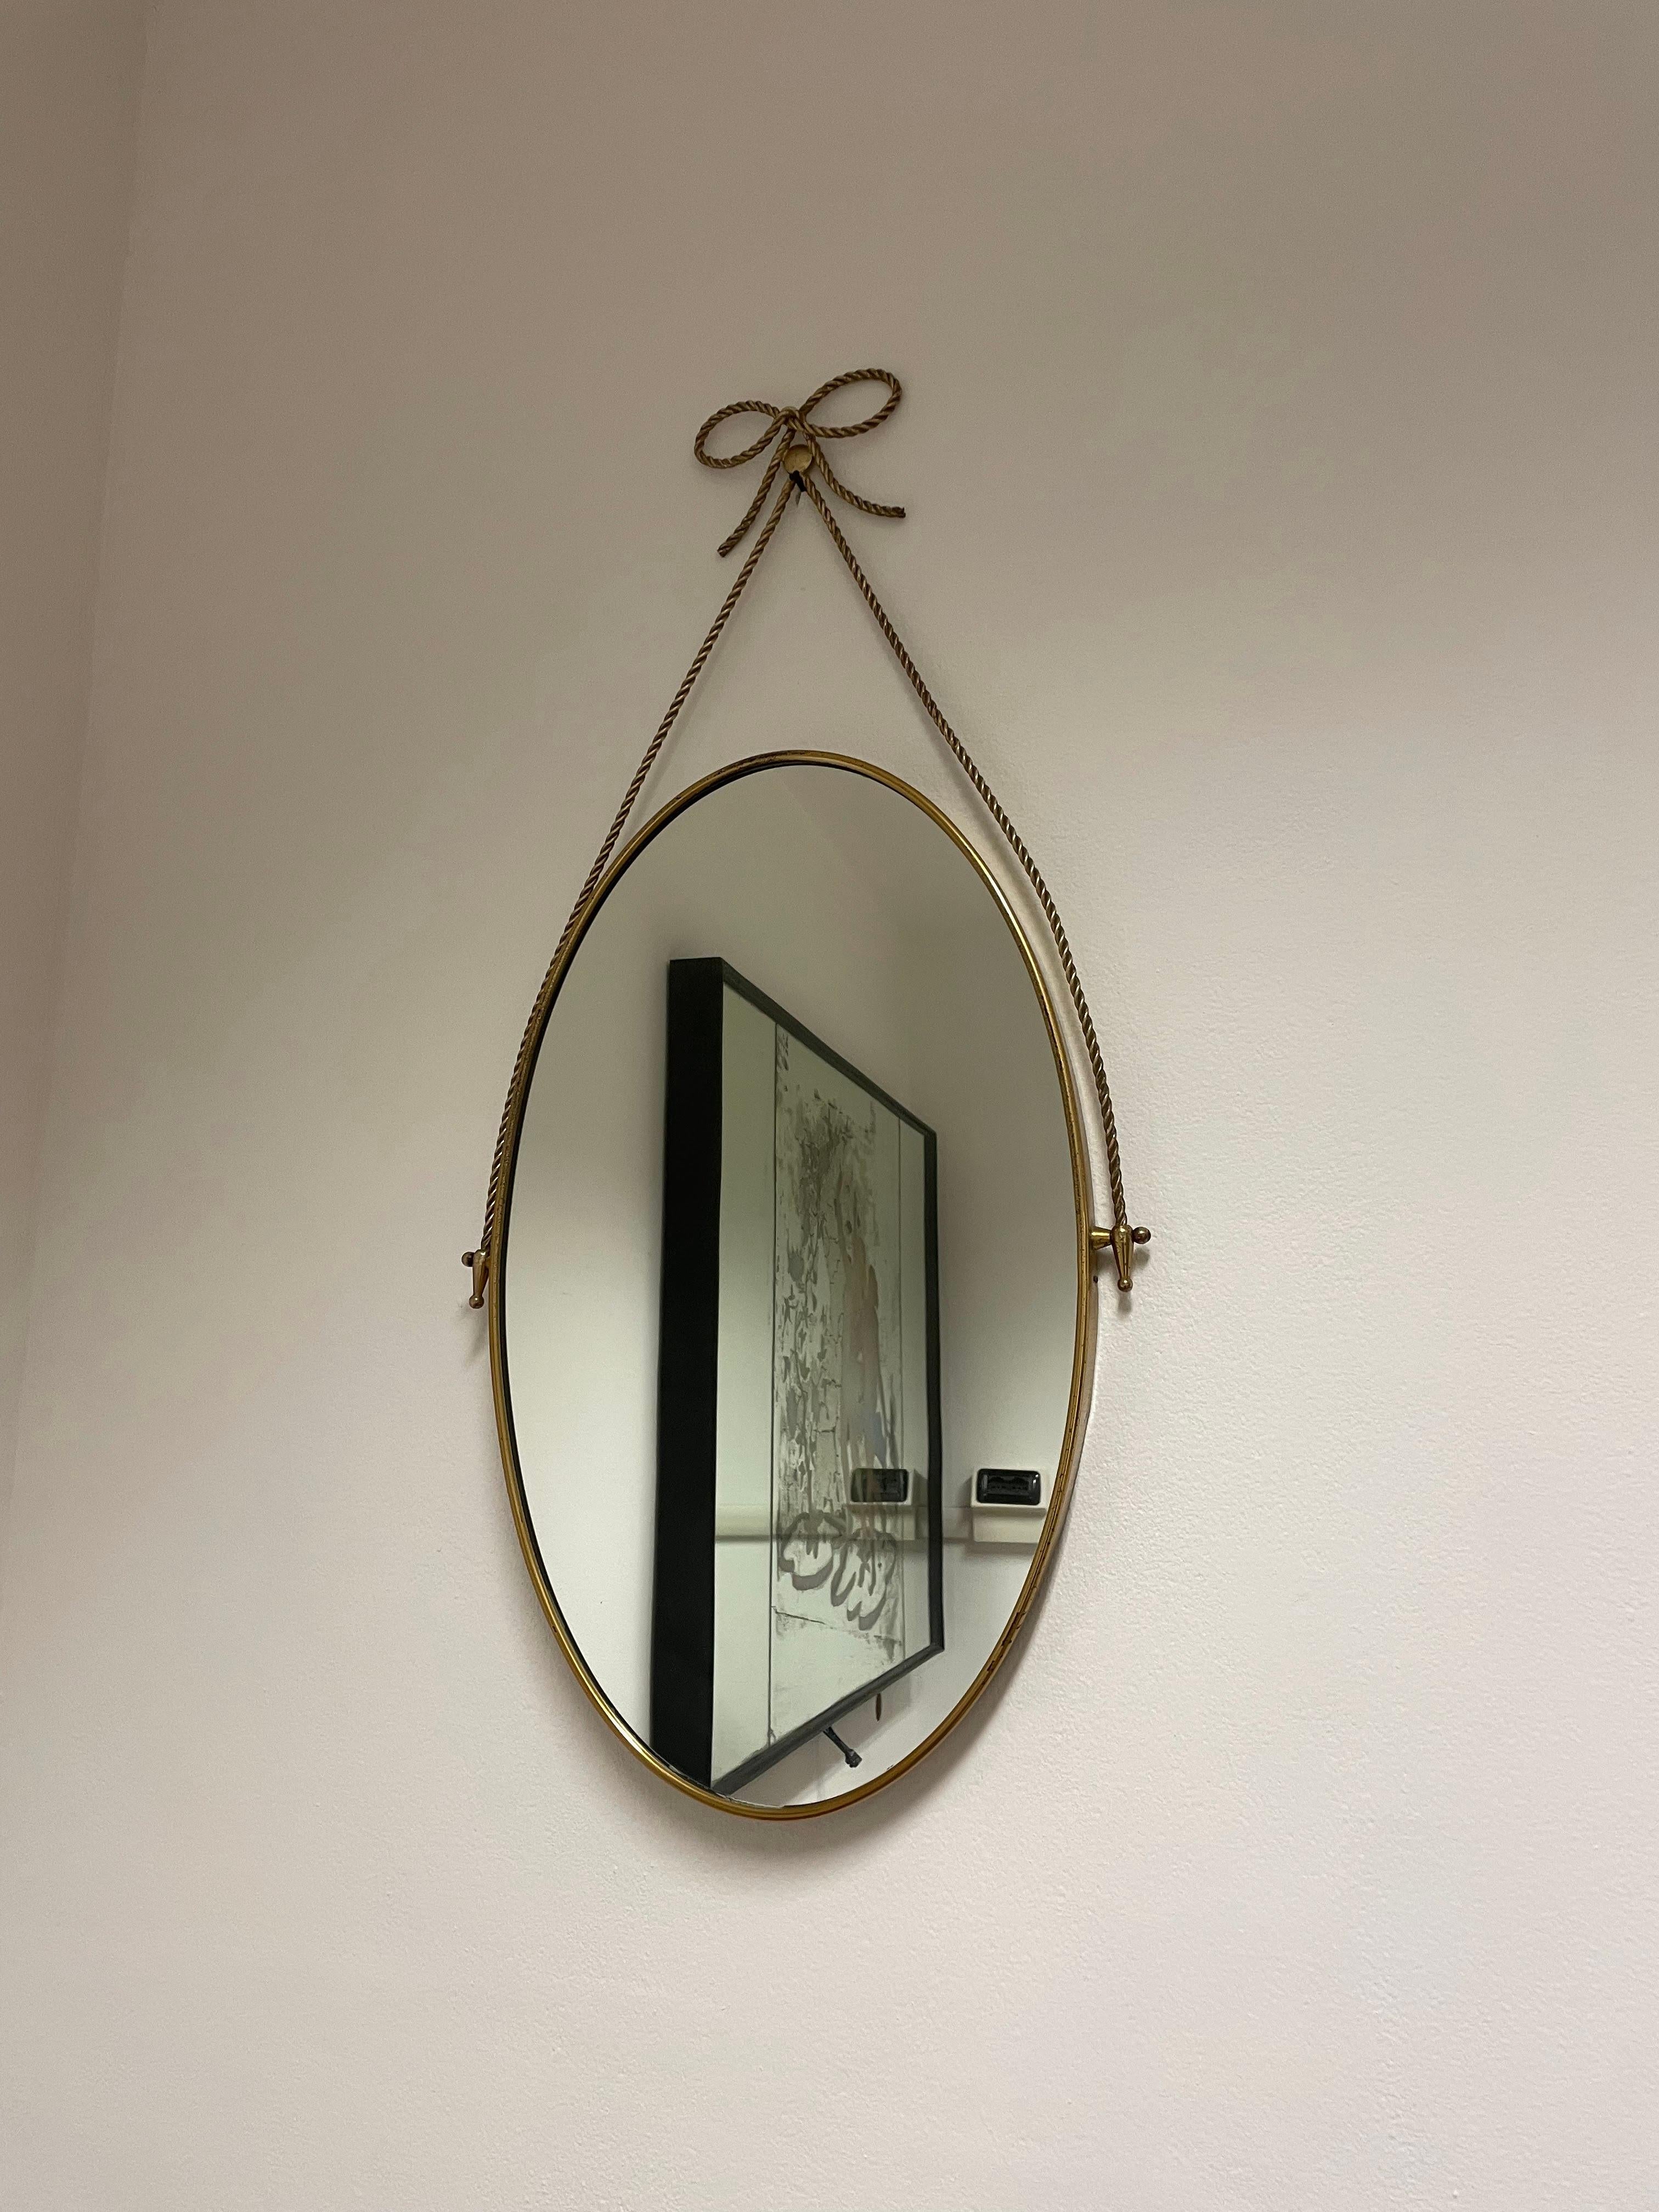 1950s mirror with brass frame and bow motif.

Peculiar pattern that further enriches this elegant mirror.

The measurements of the mirror alone are as follows while those of the total footprint are included in the sheet

H only mirror 60 cm
L only